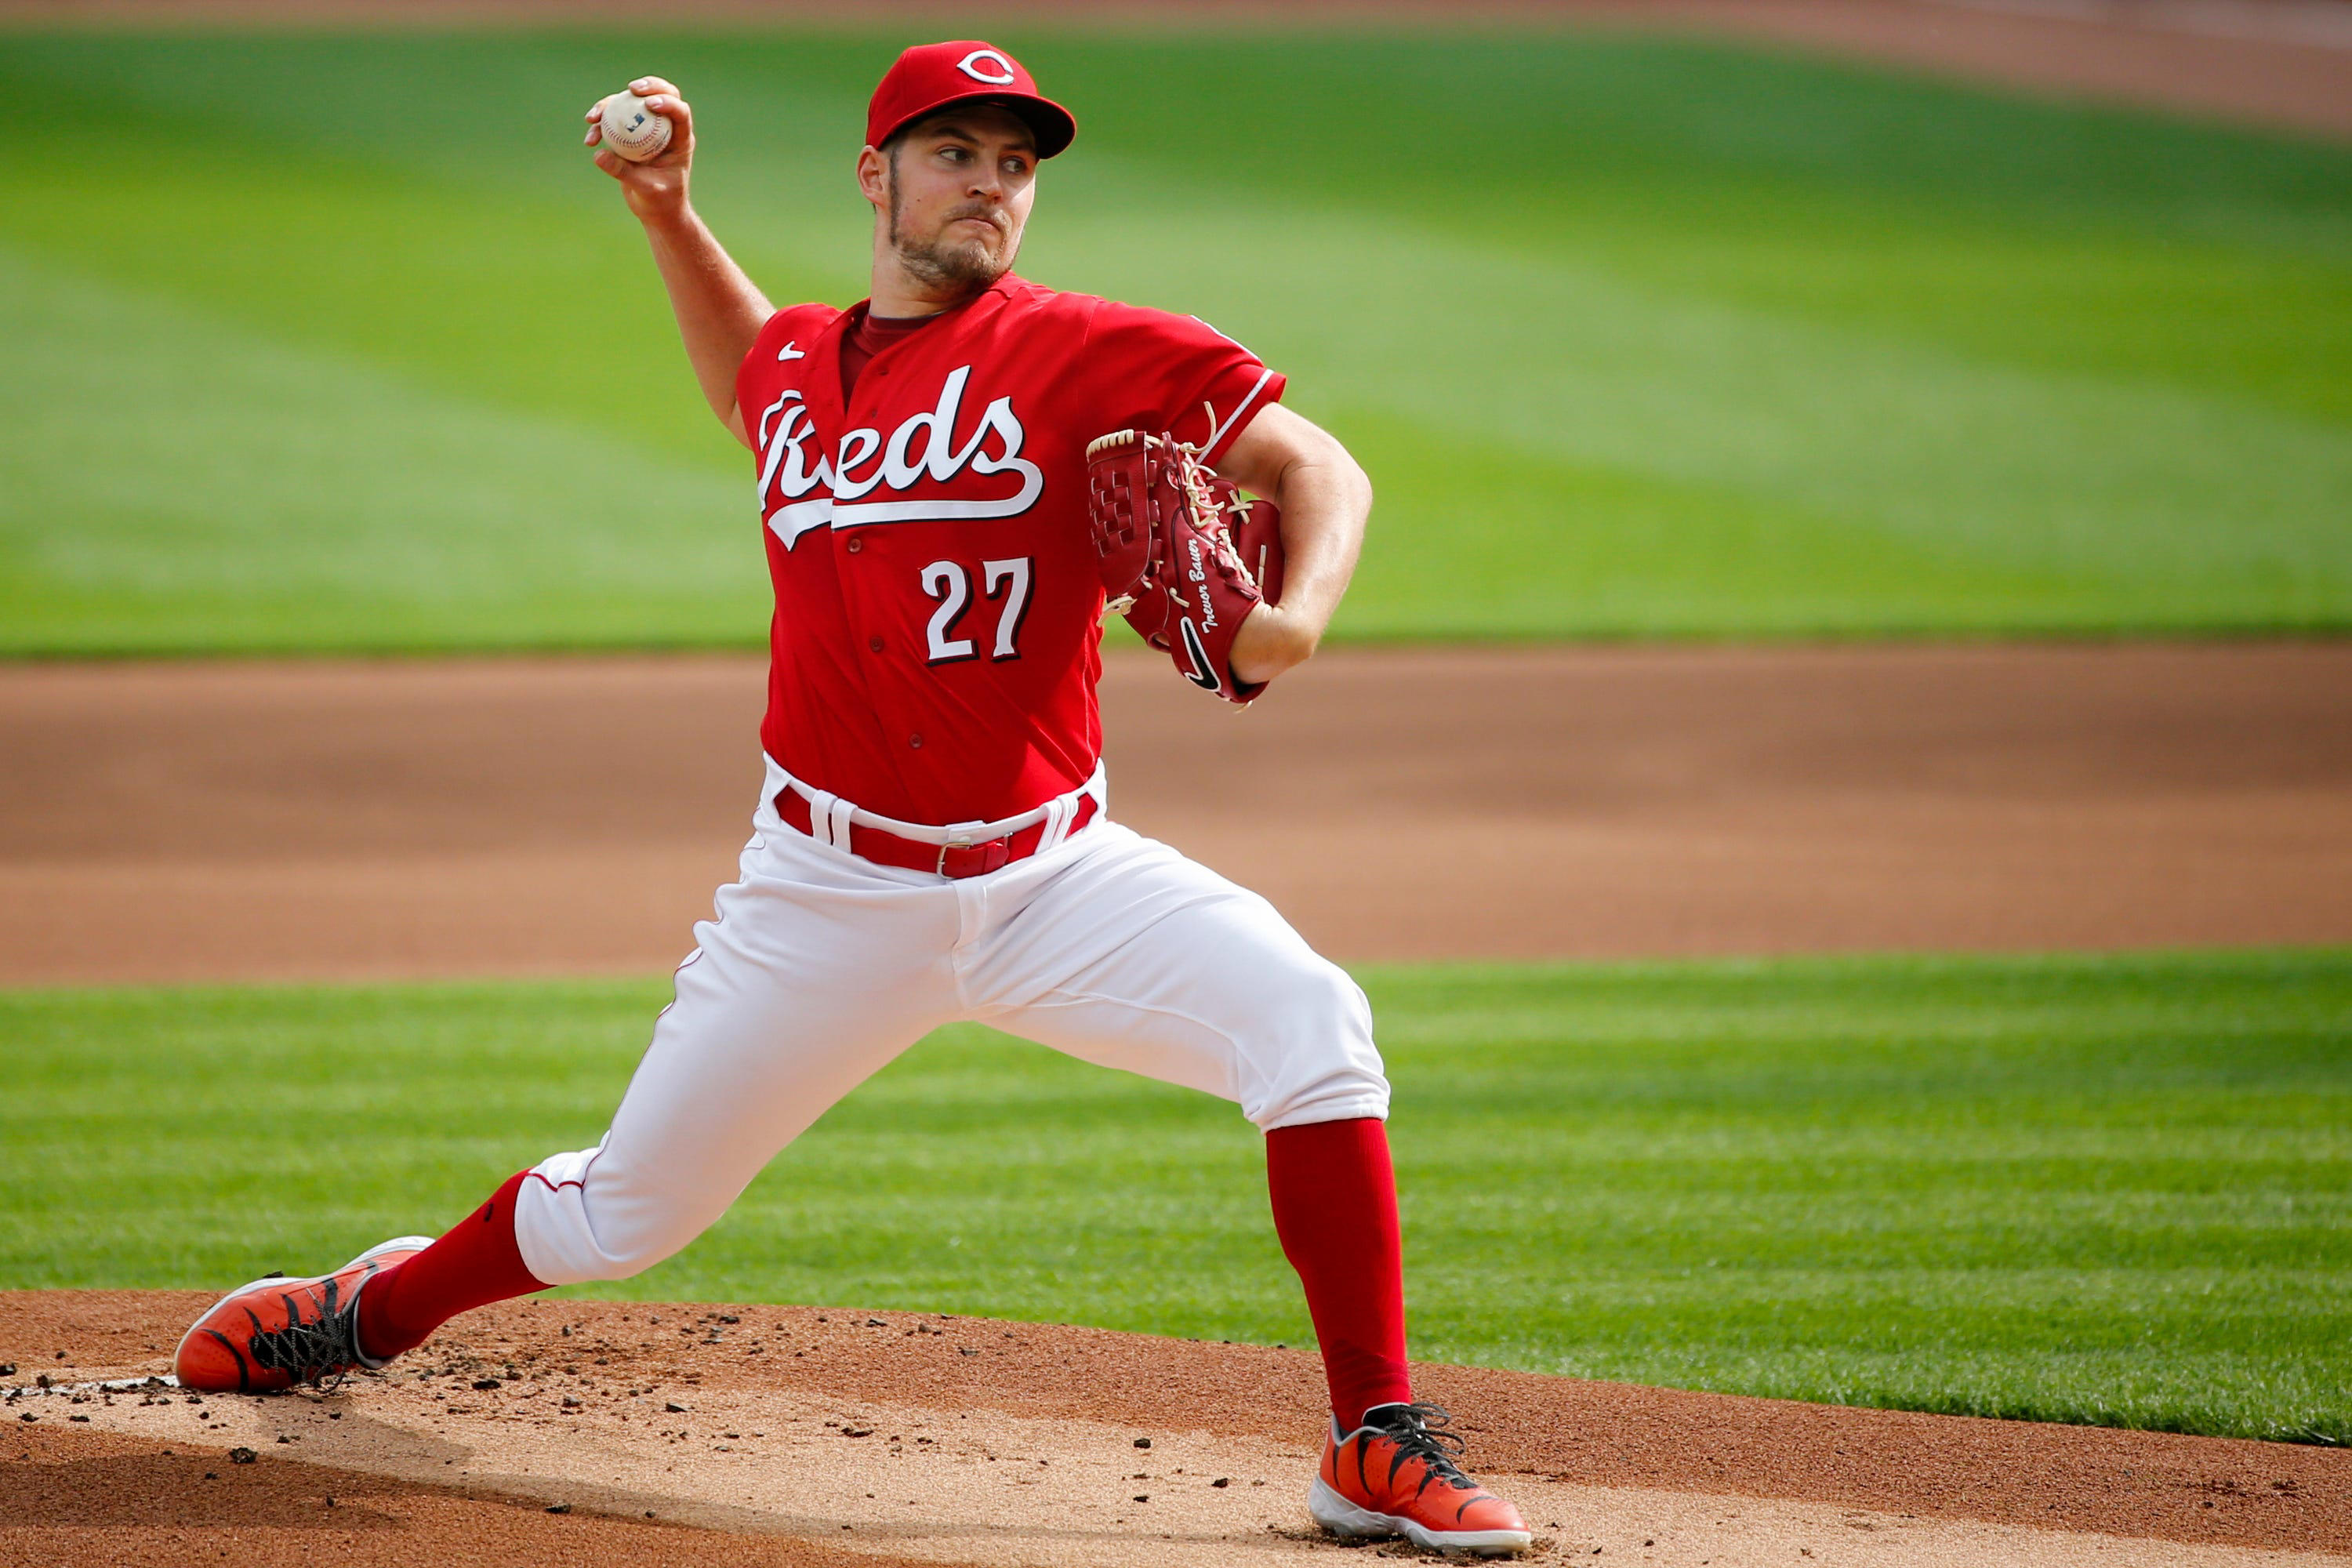 Former Reds Pitcher Trevor Bauer Faces Another Sexual Assault Allegation Which He Denies 4541